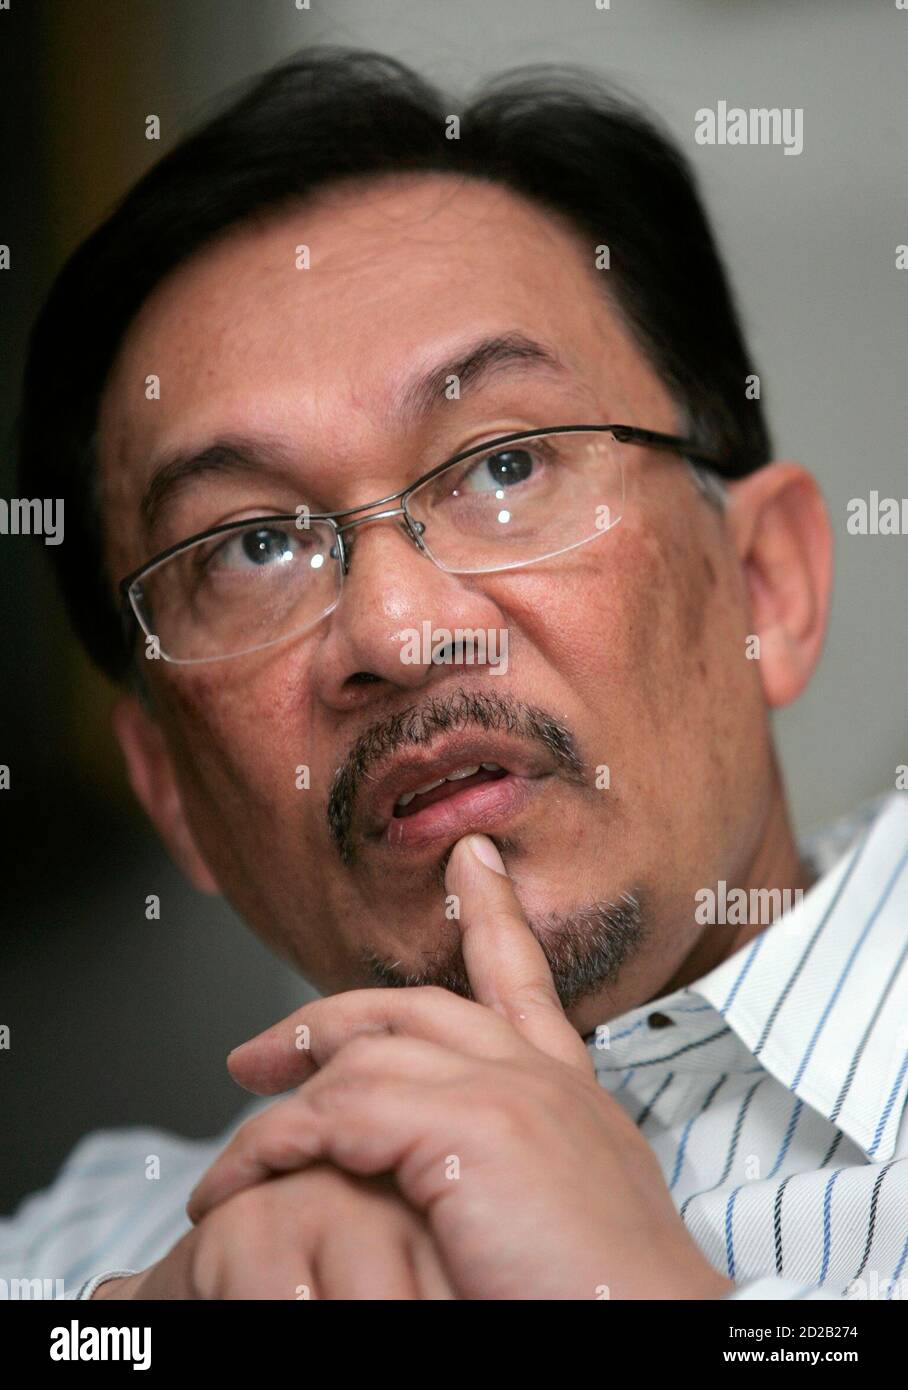 Malaysian opposition figure Anwar Ibrahim gestures during a news conference at his residence in Kuala Lumpur January 10, 2007. Anwar said on Wednesday the police should investigate whether a prominent political analyst used government connections to organise the murder of a Mongolian model.  REUTERS/Zainal Abd Halim (MALAYSIA) Stock Photo